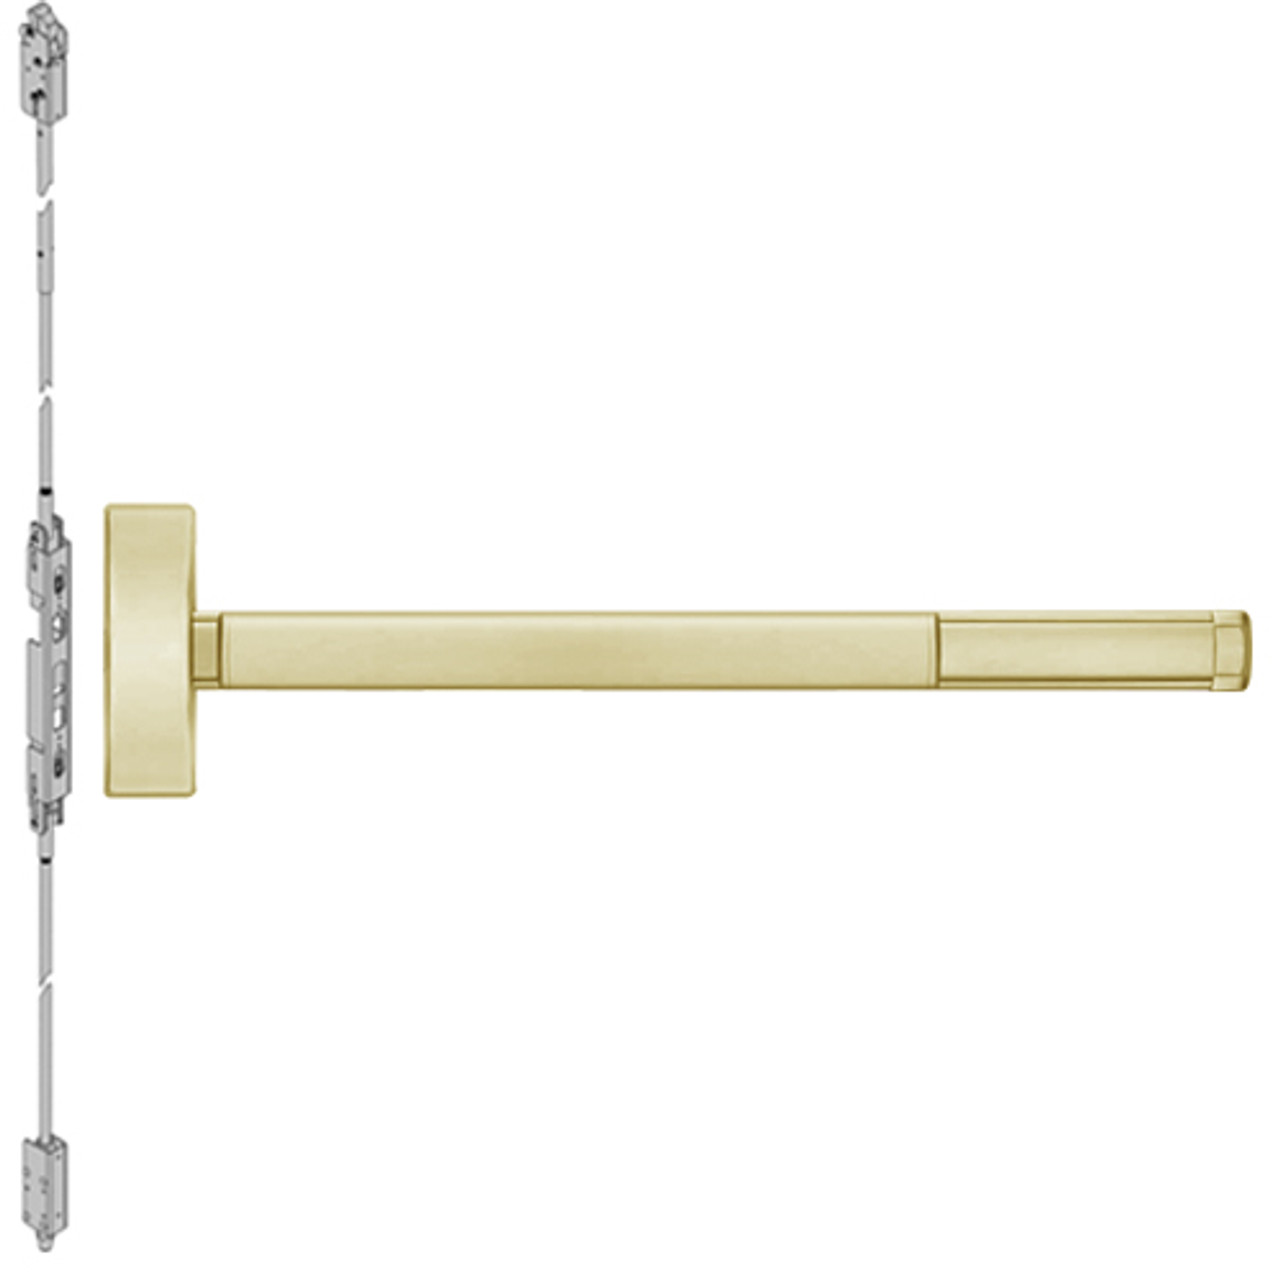 DE2805LBR-606-48 PHI 2800 Series Concealed Vertical Rod Exit Device with Delayed Egress Prepped for Key Controls Thumb Piece in Satin Brass Finish